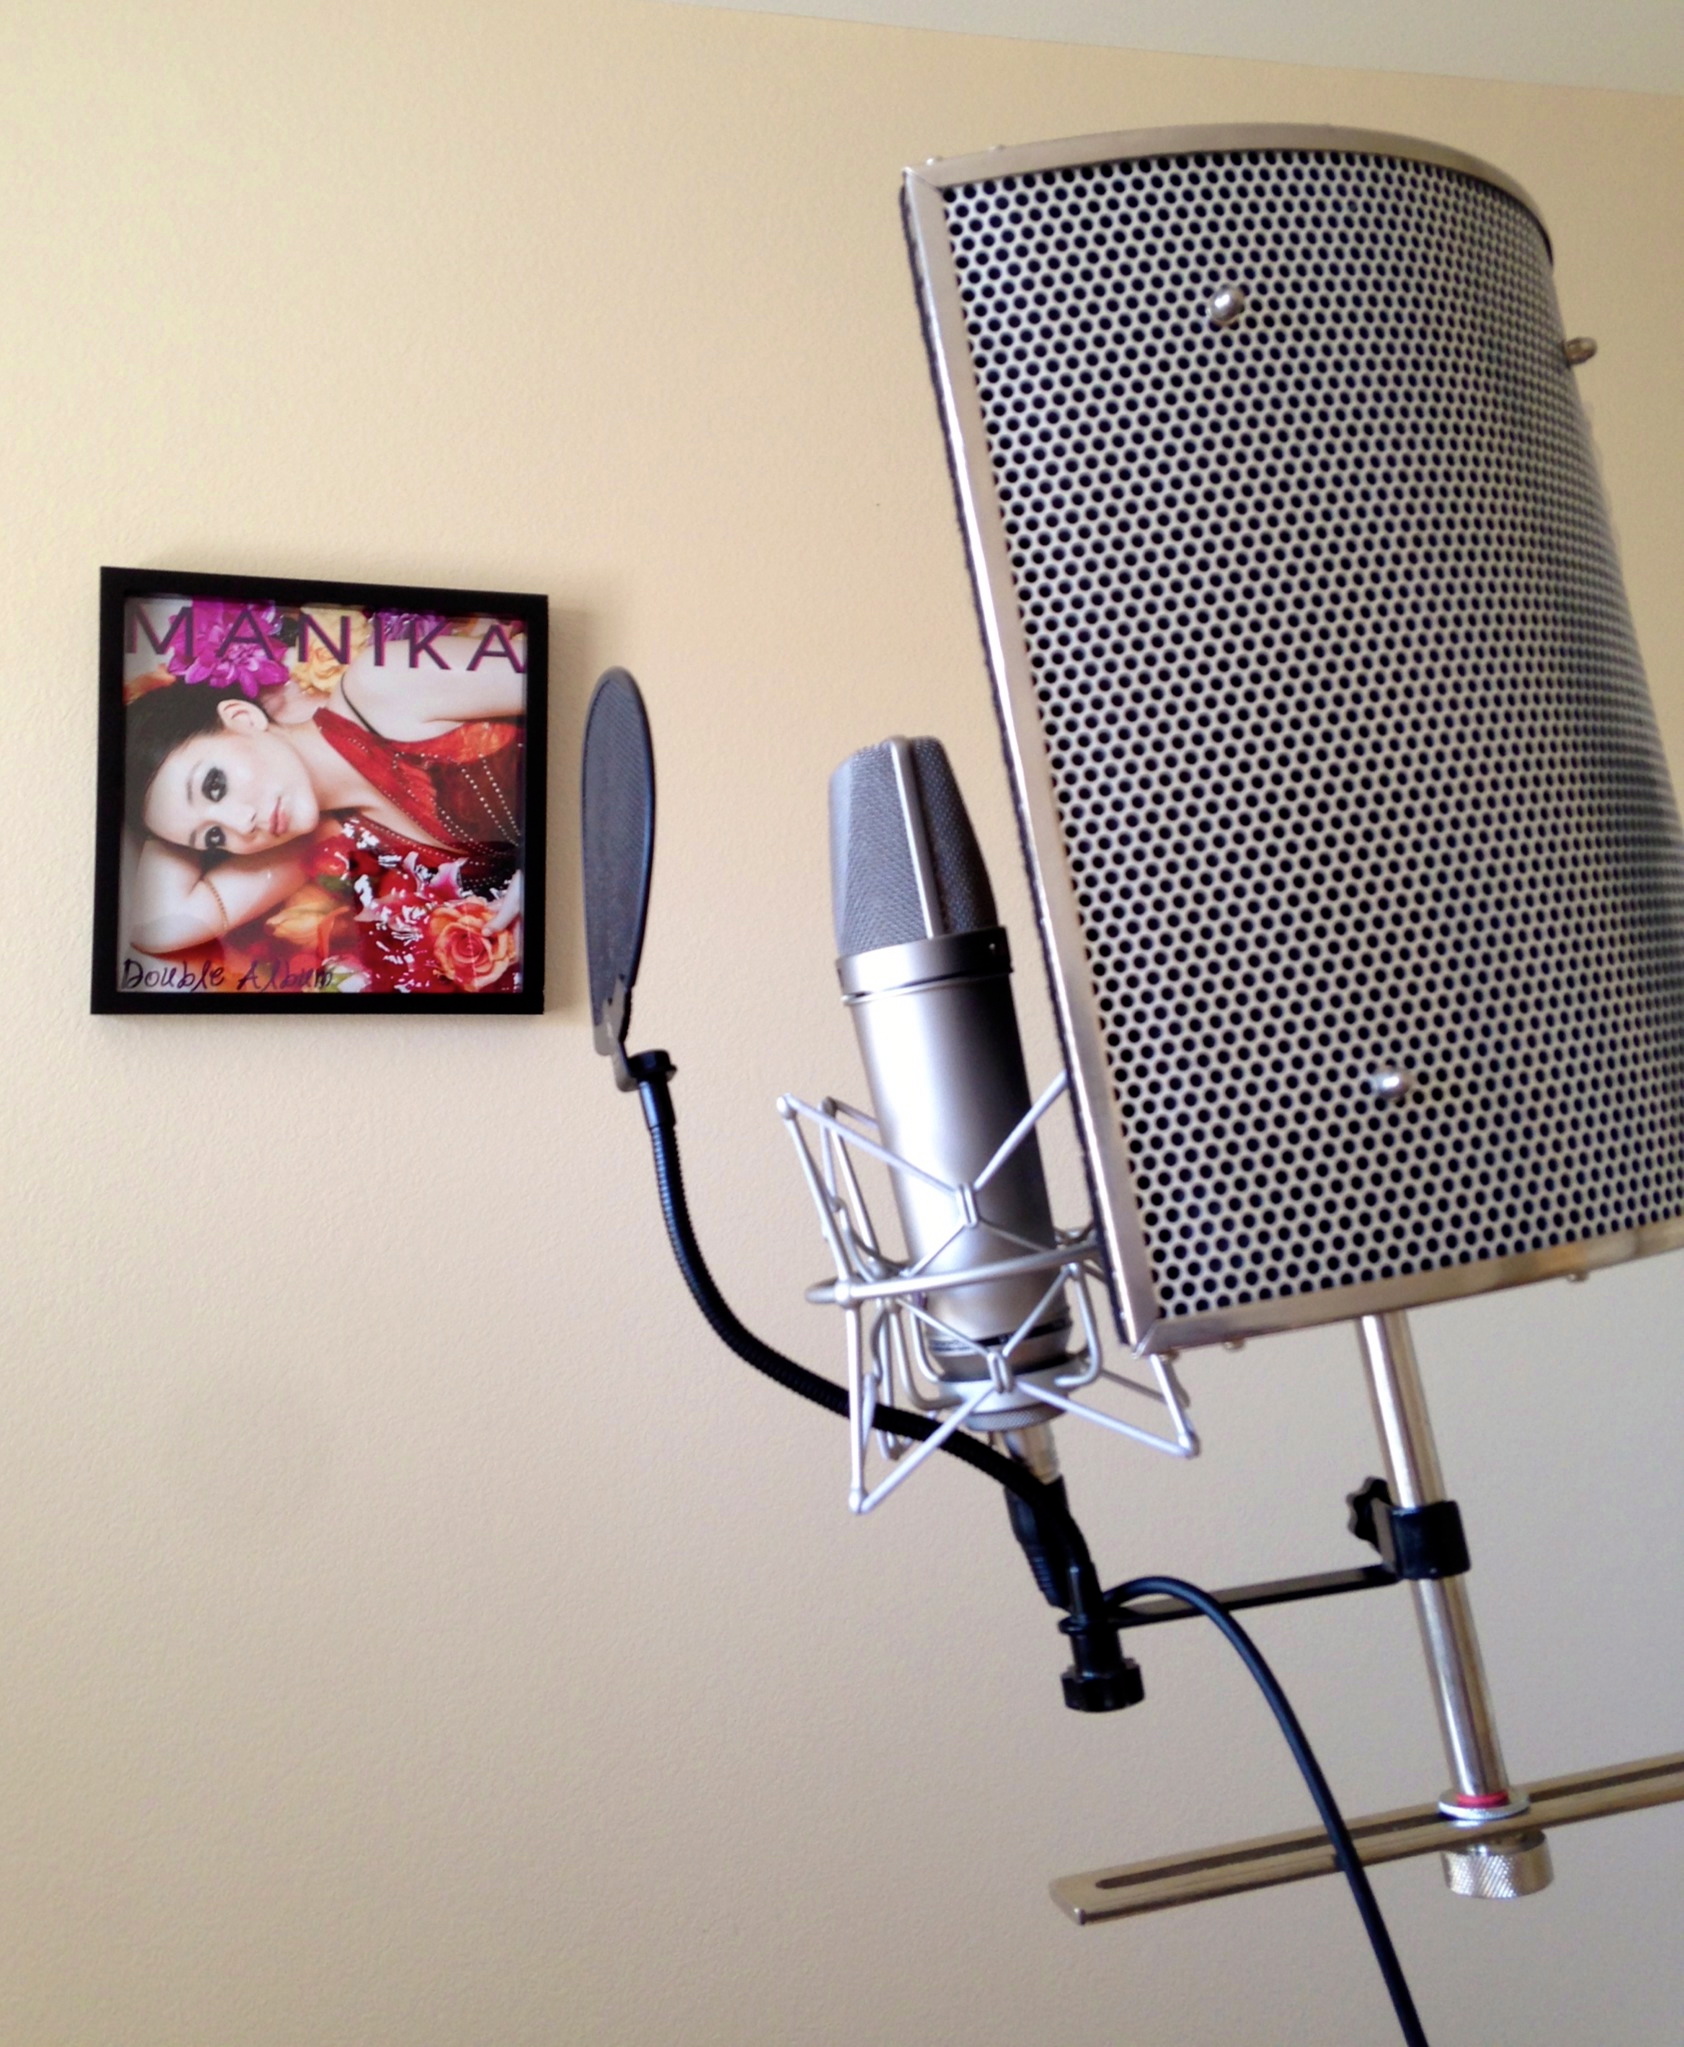 The Manika Studio Is Ready to Record In!!!